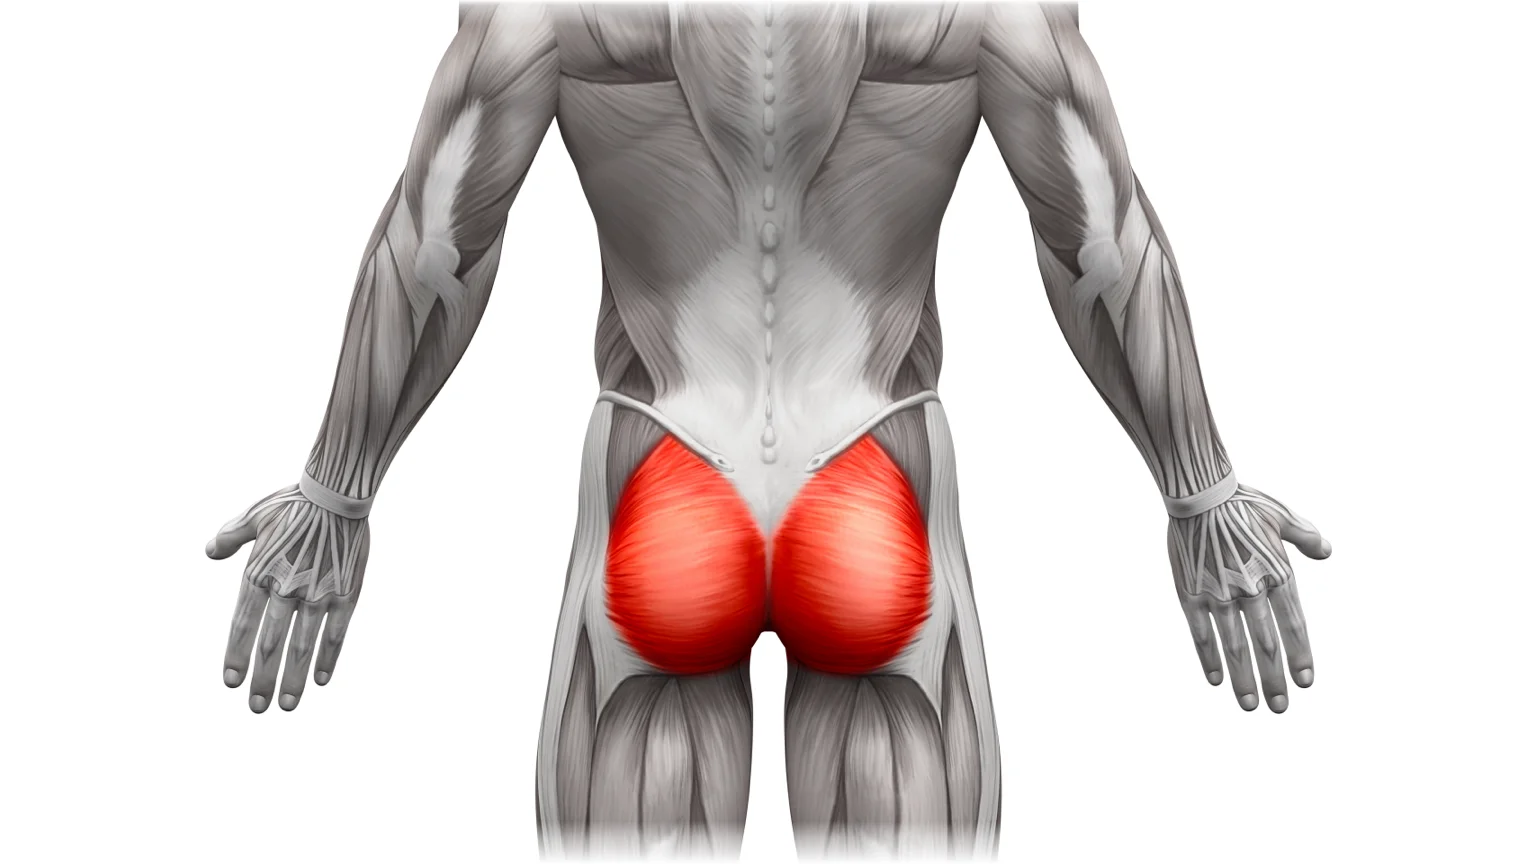 Diagram showing the glutes